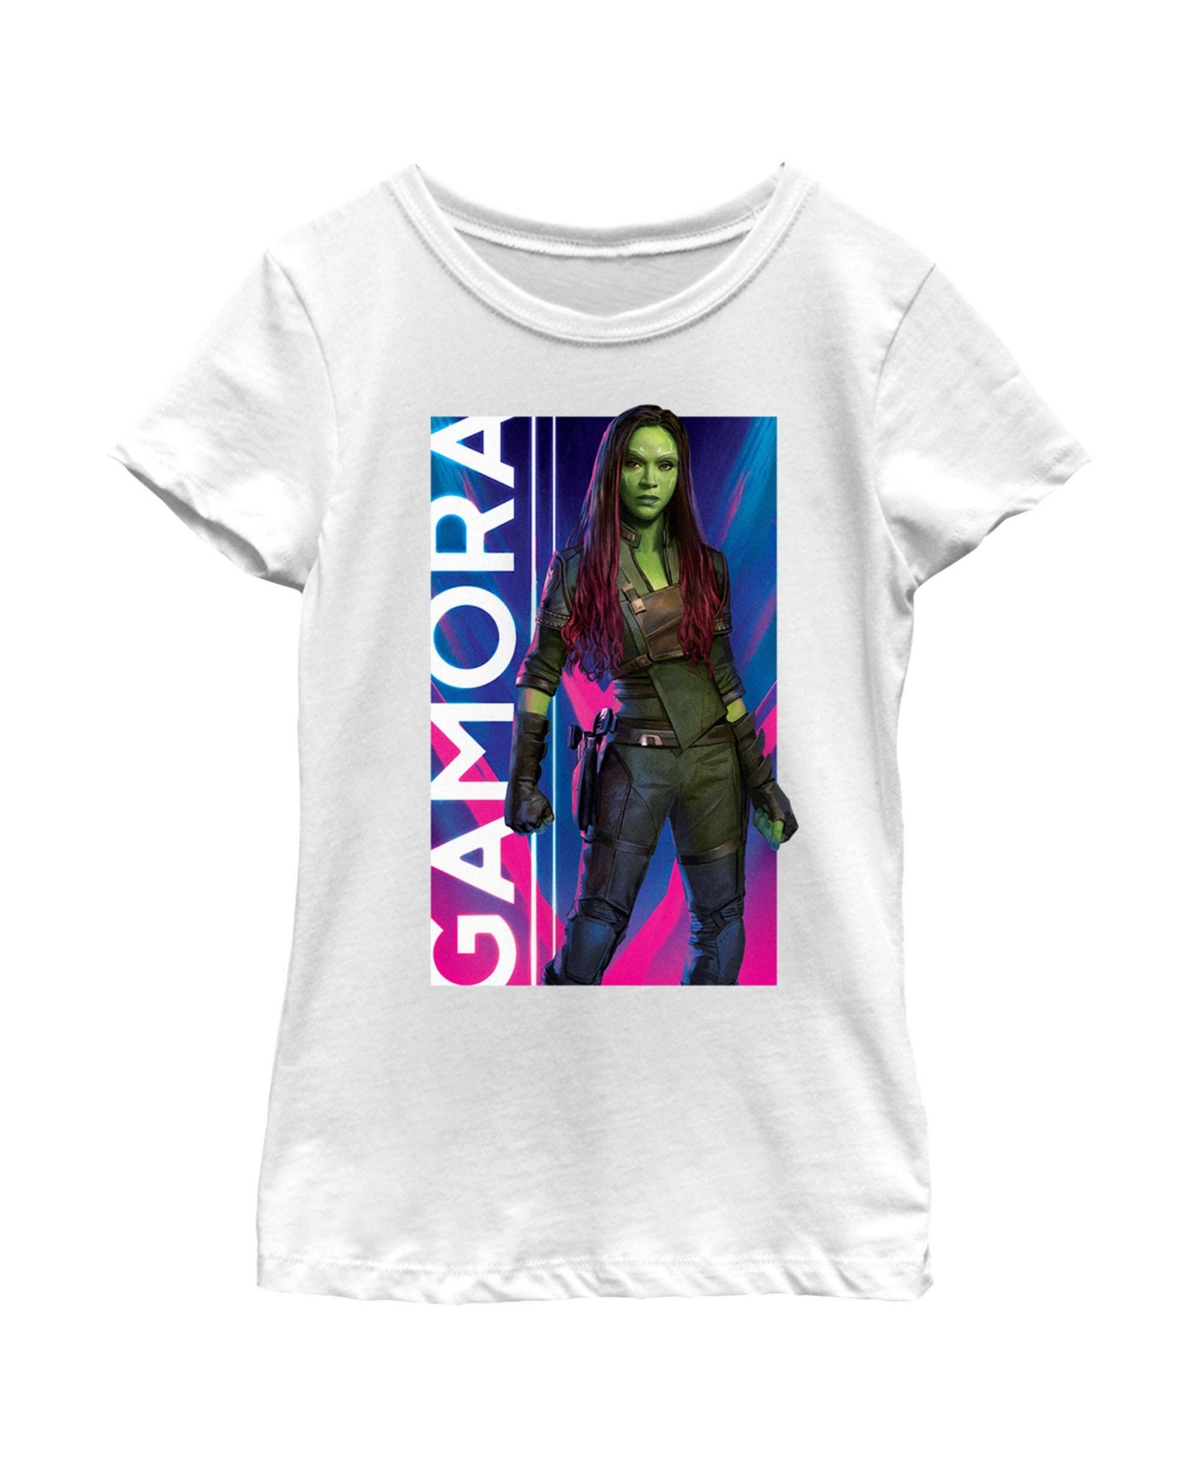 MARVEL GIRL'S GUARDIANS OF THE GALAXY VOL. 3 GAMORA POSTER CHILD T-SHIRT